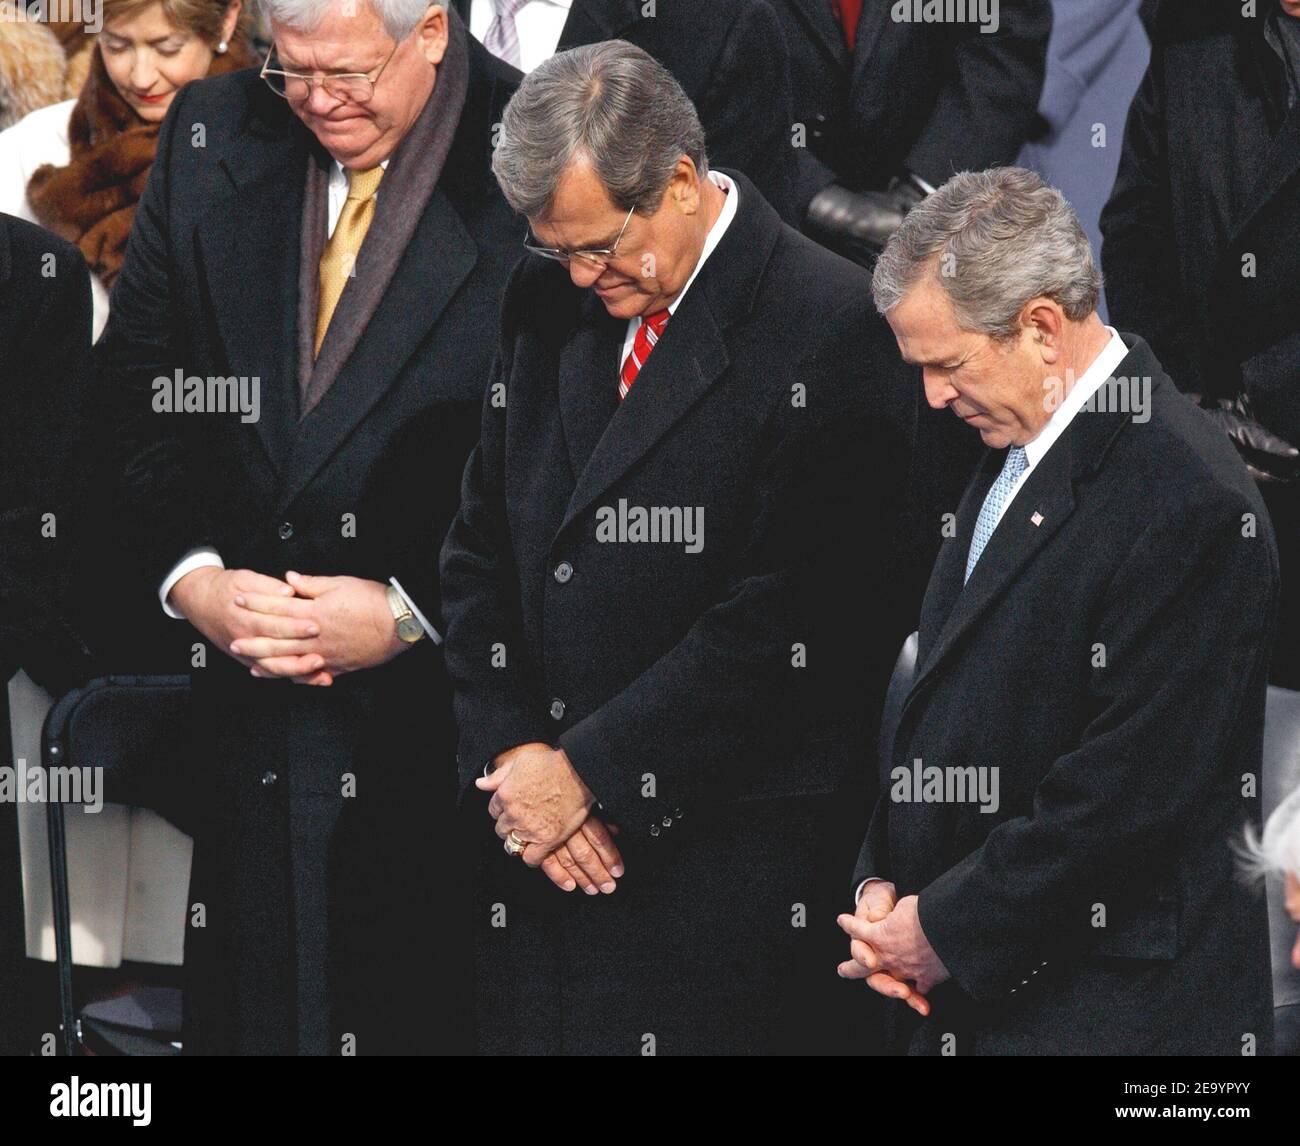 From left, Speaker of the House Dennis Hastert, former Senator Trent Lott and President George W. Bush bow their heads as the invocation is made, during Inauguration ceremonies on the west front of the U.S. Capitol January 20, 2005, in Washington, D.C. Photo by Douliery-Khayat/ABACA. Stock Photo